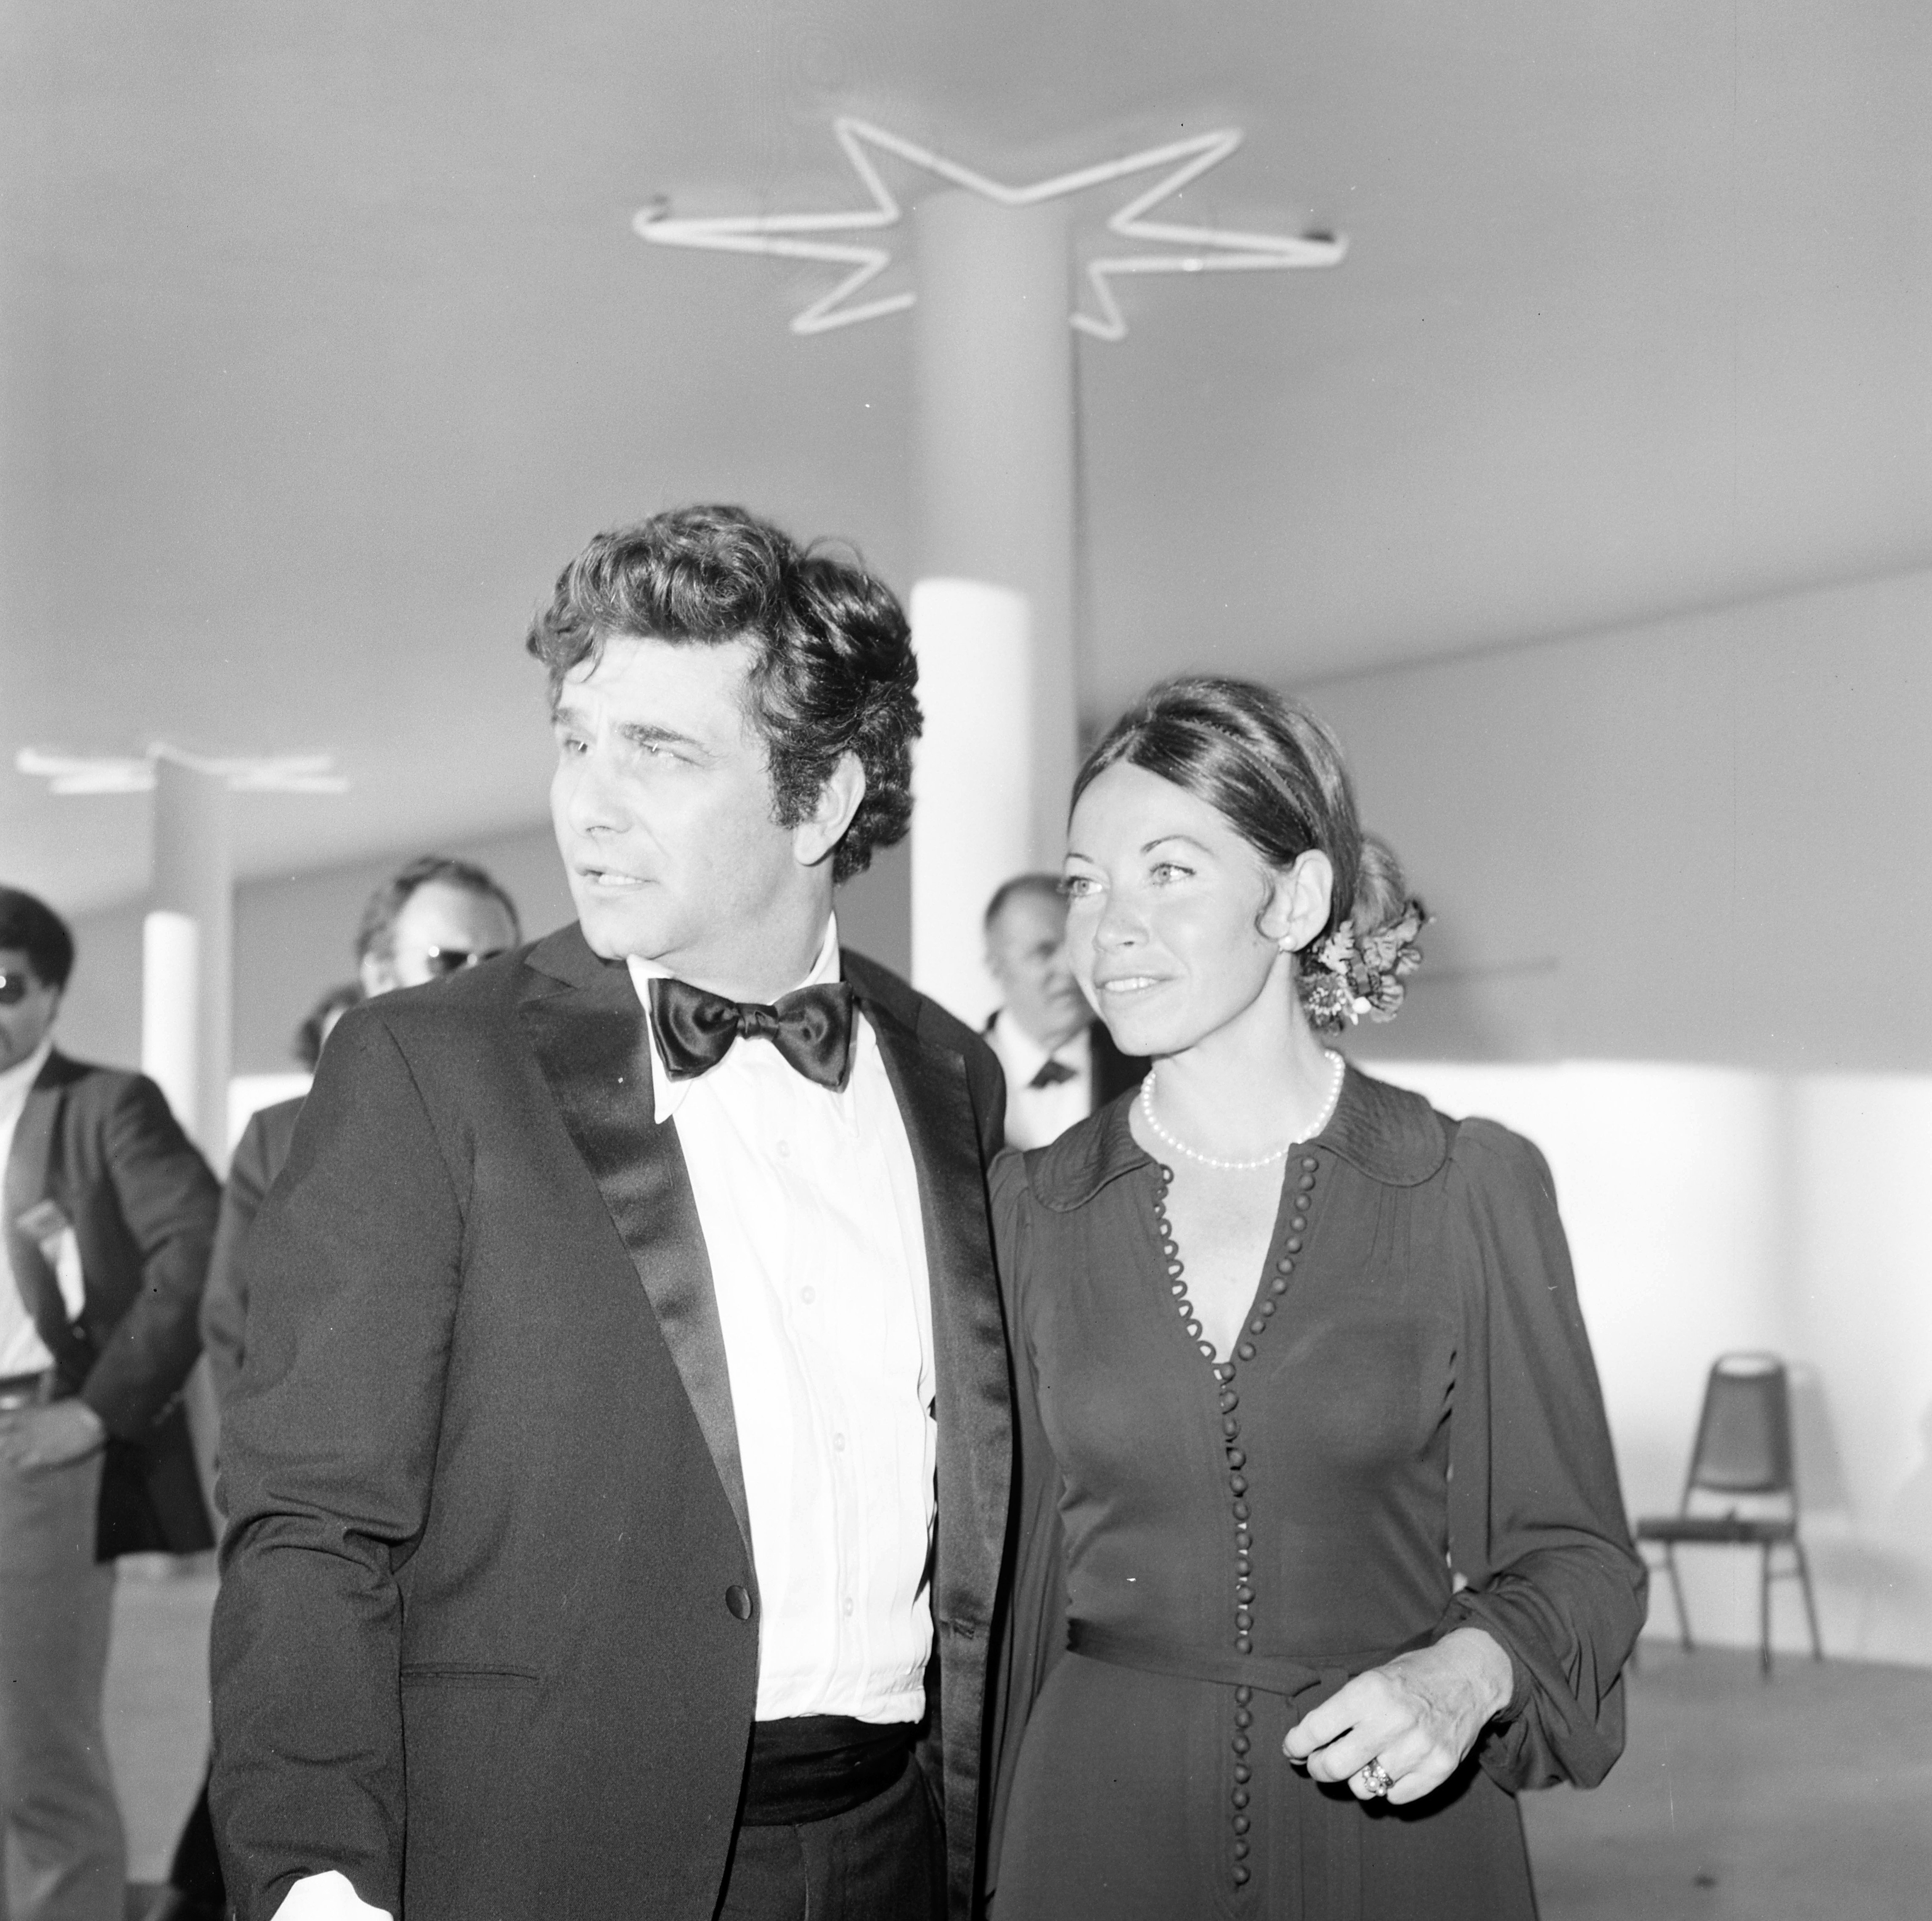 Actor Peter Falk with wife Alyce Mayo attends a party in Los Angeles, California in 1972 | Source: Getty Images